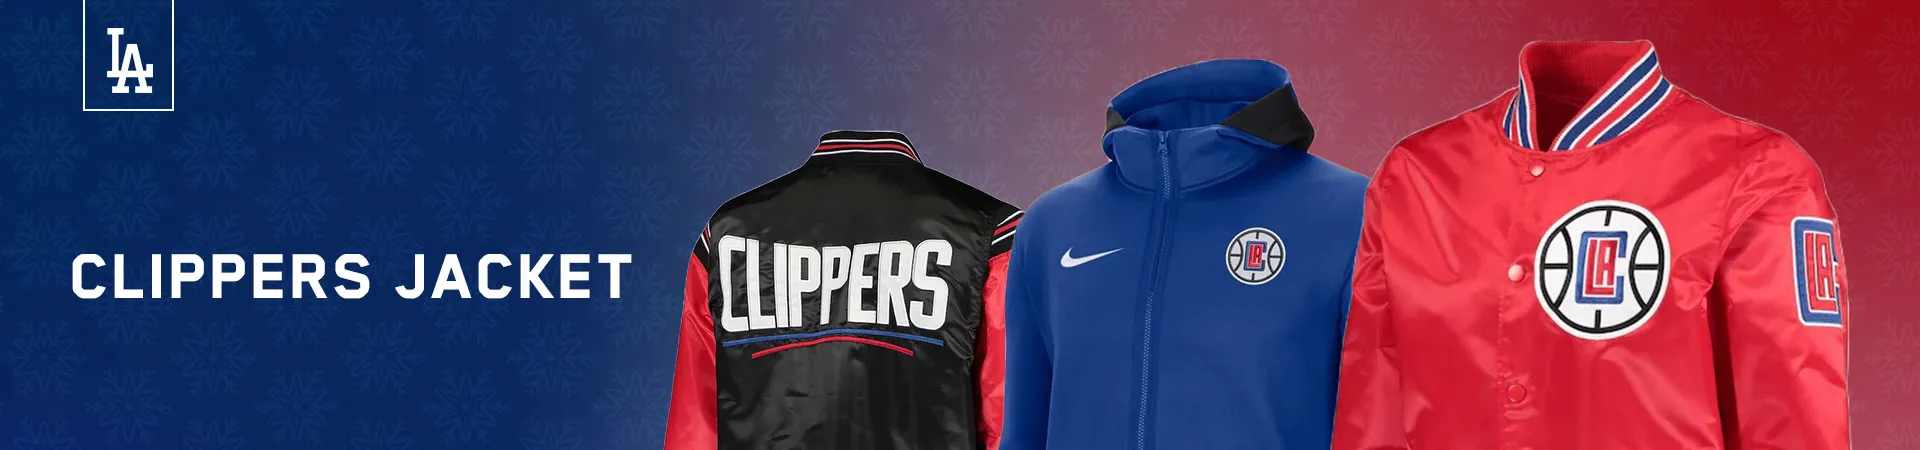 Clippers Jacket Banner